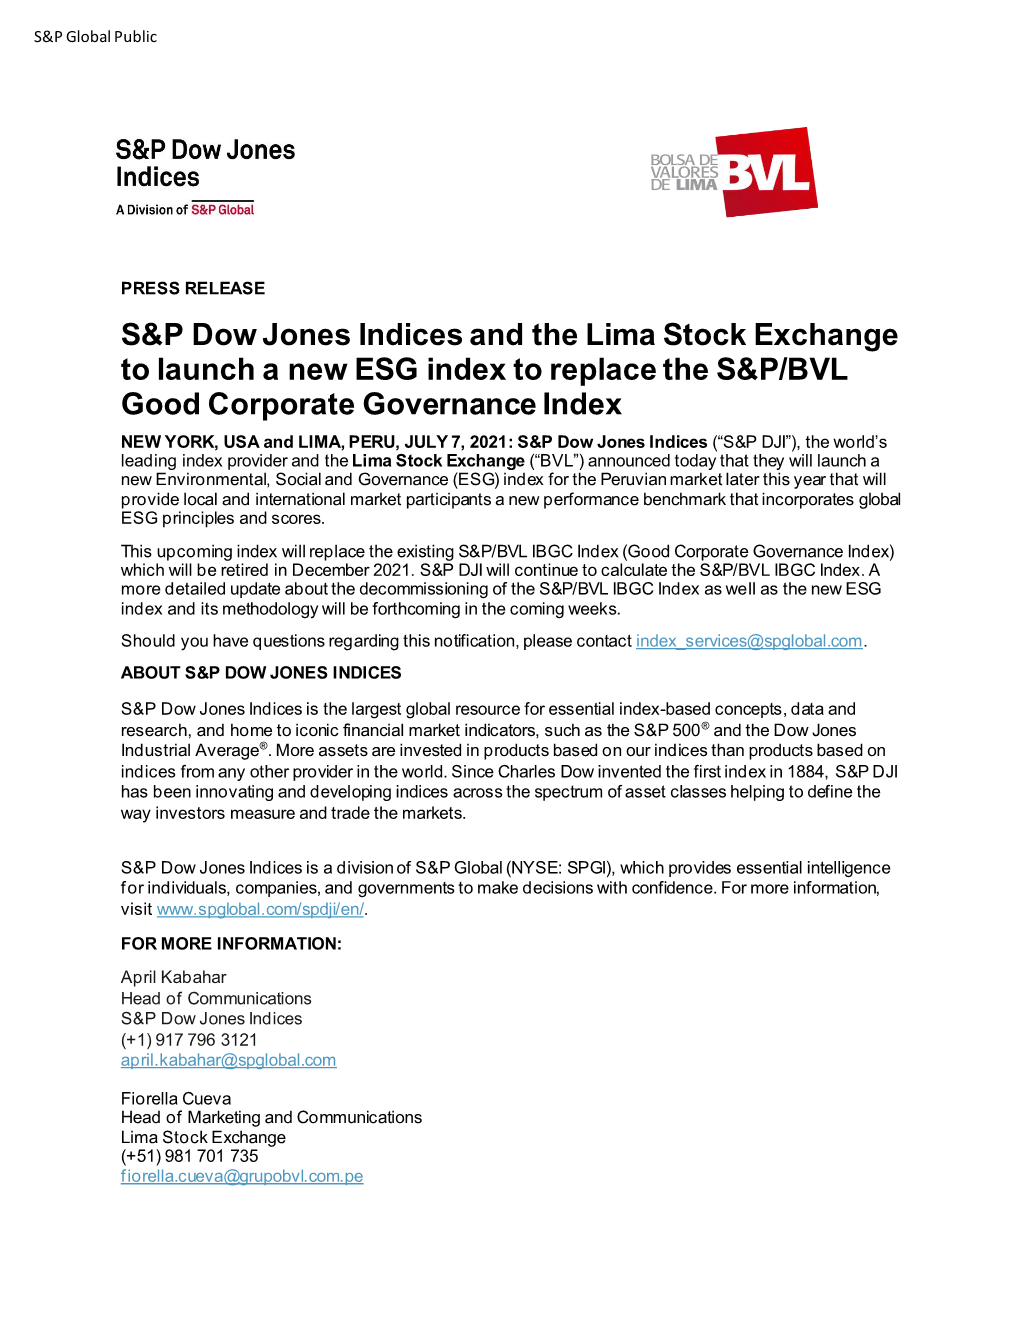 S&P Dow Jones Indices and the Lima Stock Exchange to Launch a New